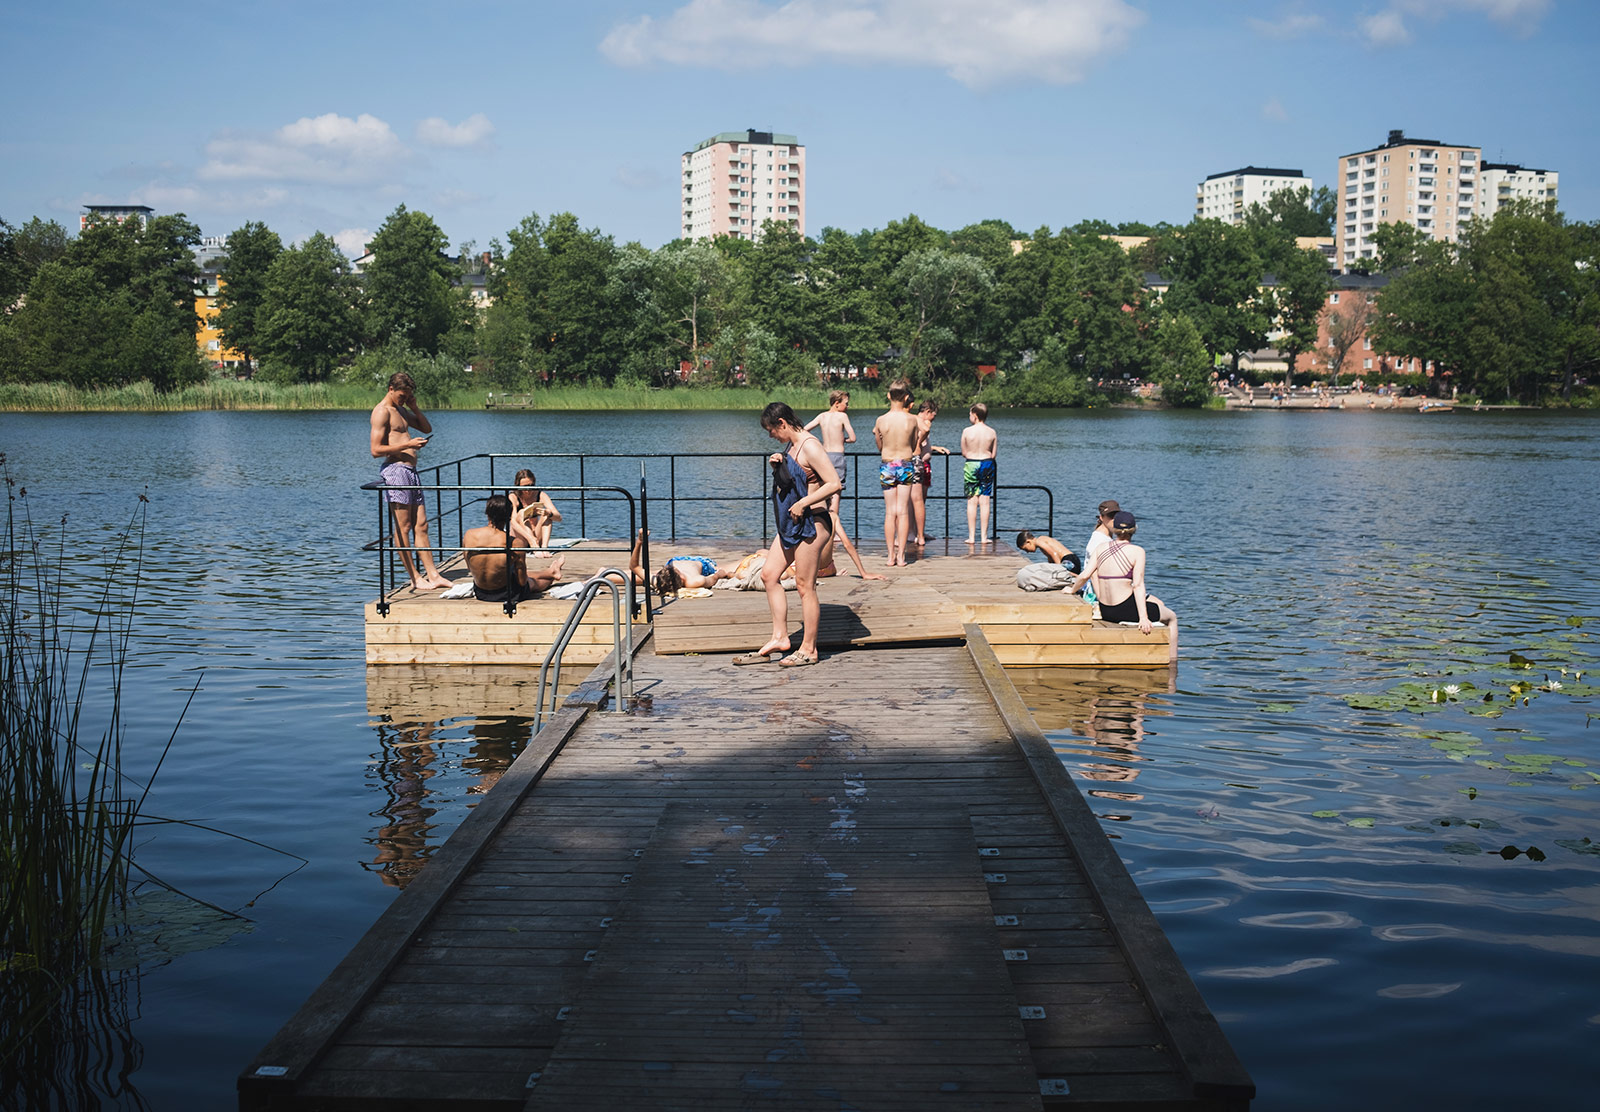 Swimmers standing on wooden jetty